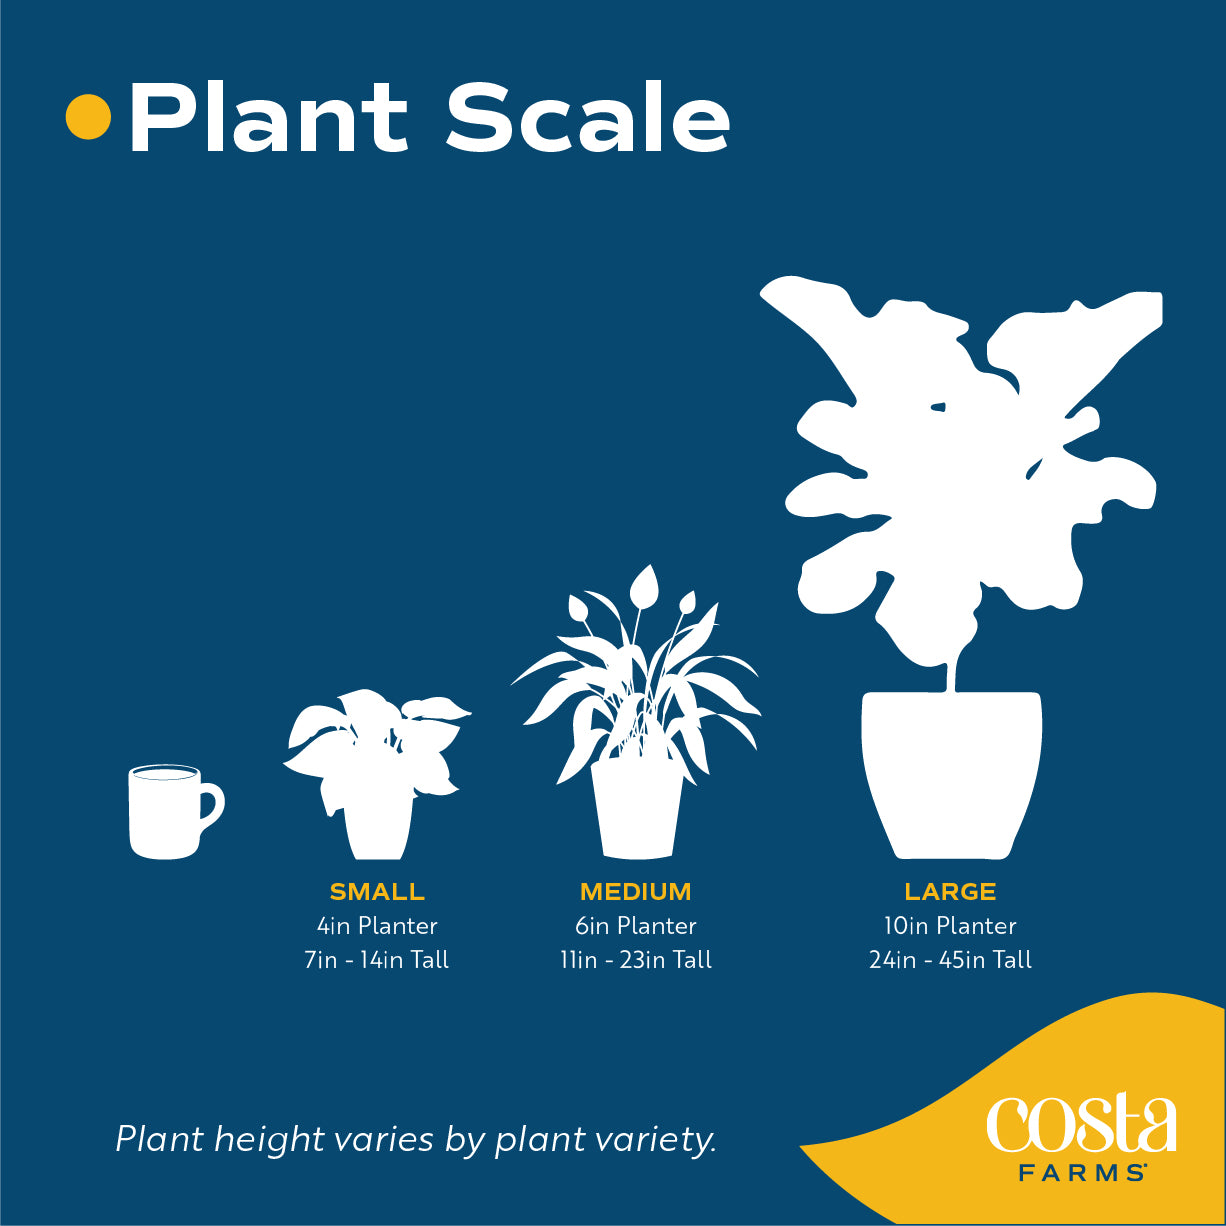 digital size chart illustration showcasing the size options for plant at costa farms small is a 4in planter with 7in - 14in tall plant a medium is a 6in planter with a 11in - 23in tall plant and large is a 10in planter with 24in - 45in tall plants